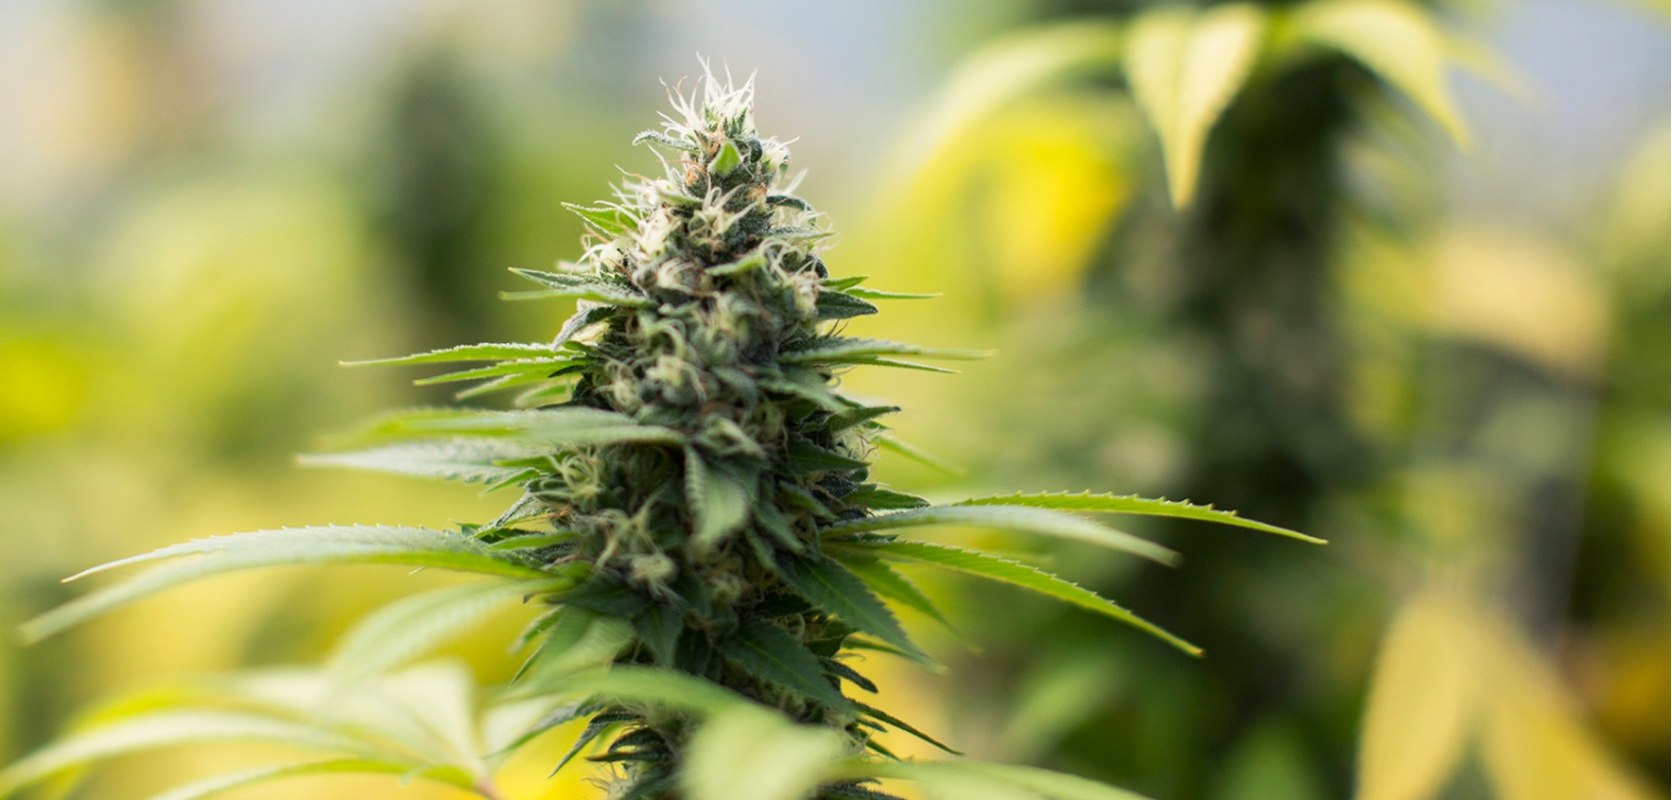 Where the typical flowering phase of the Tropicali Punch strain is a maximum of nine weeks, you’ll be pleasantly delighted with the quality and flavour fullness of the nugs.